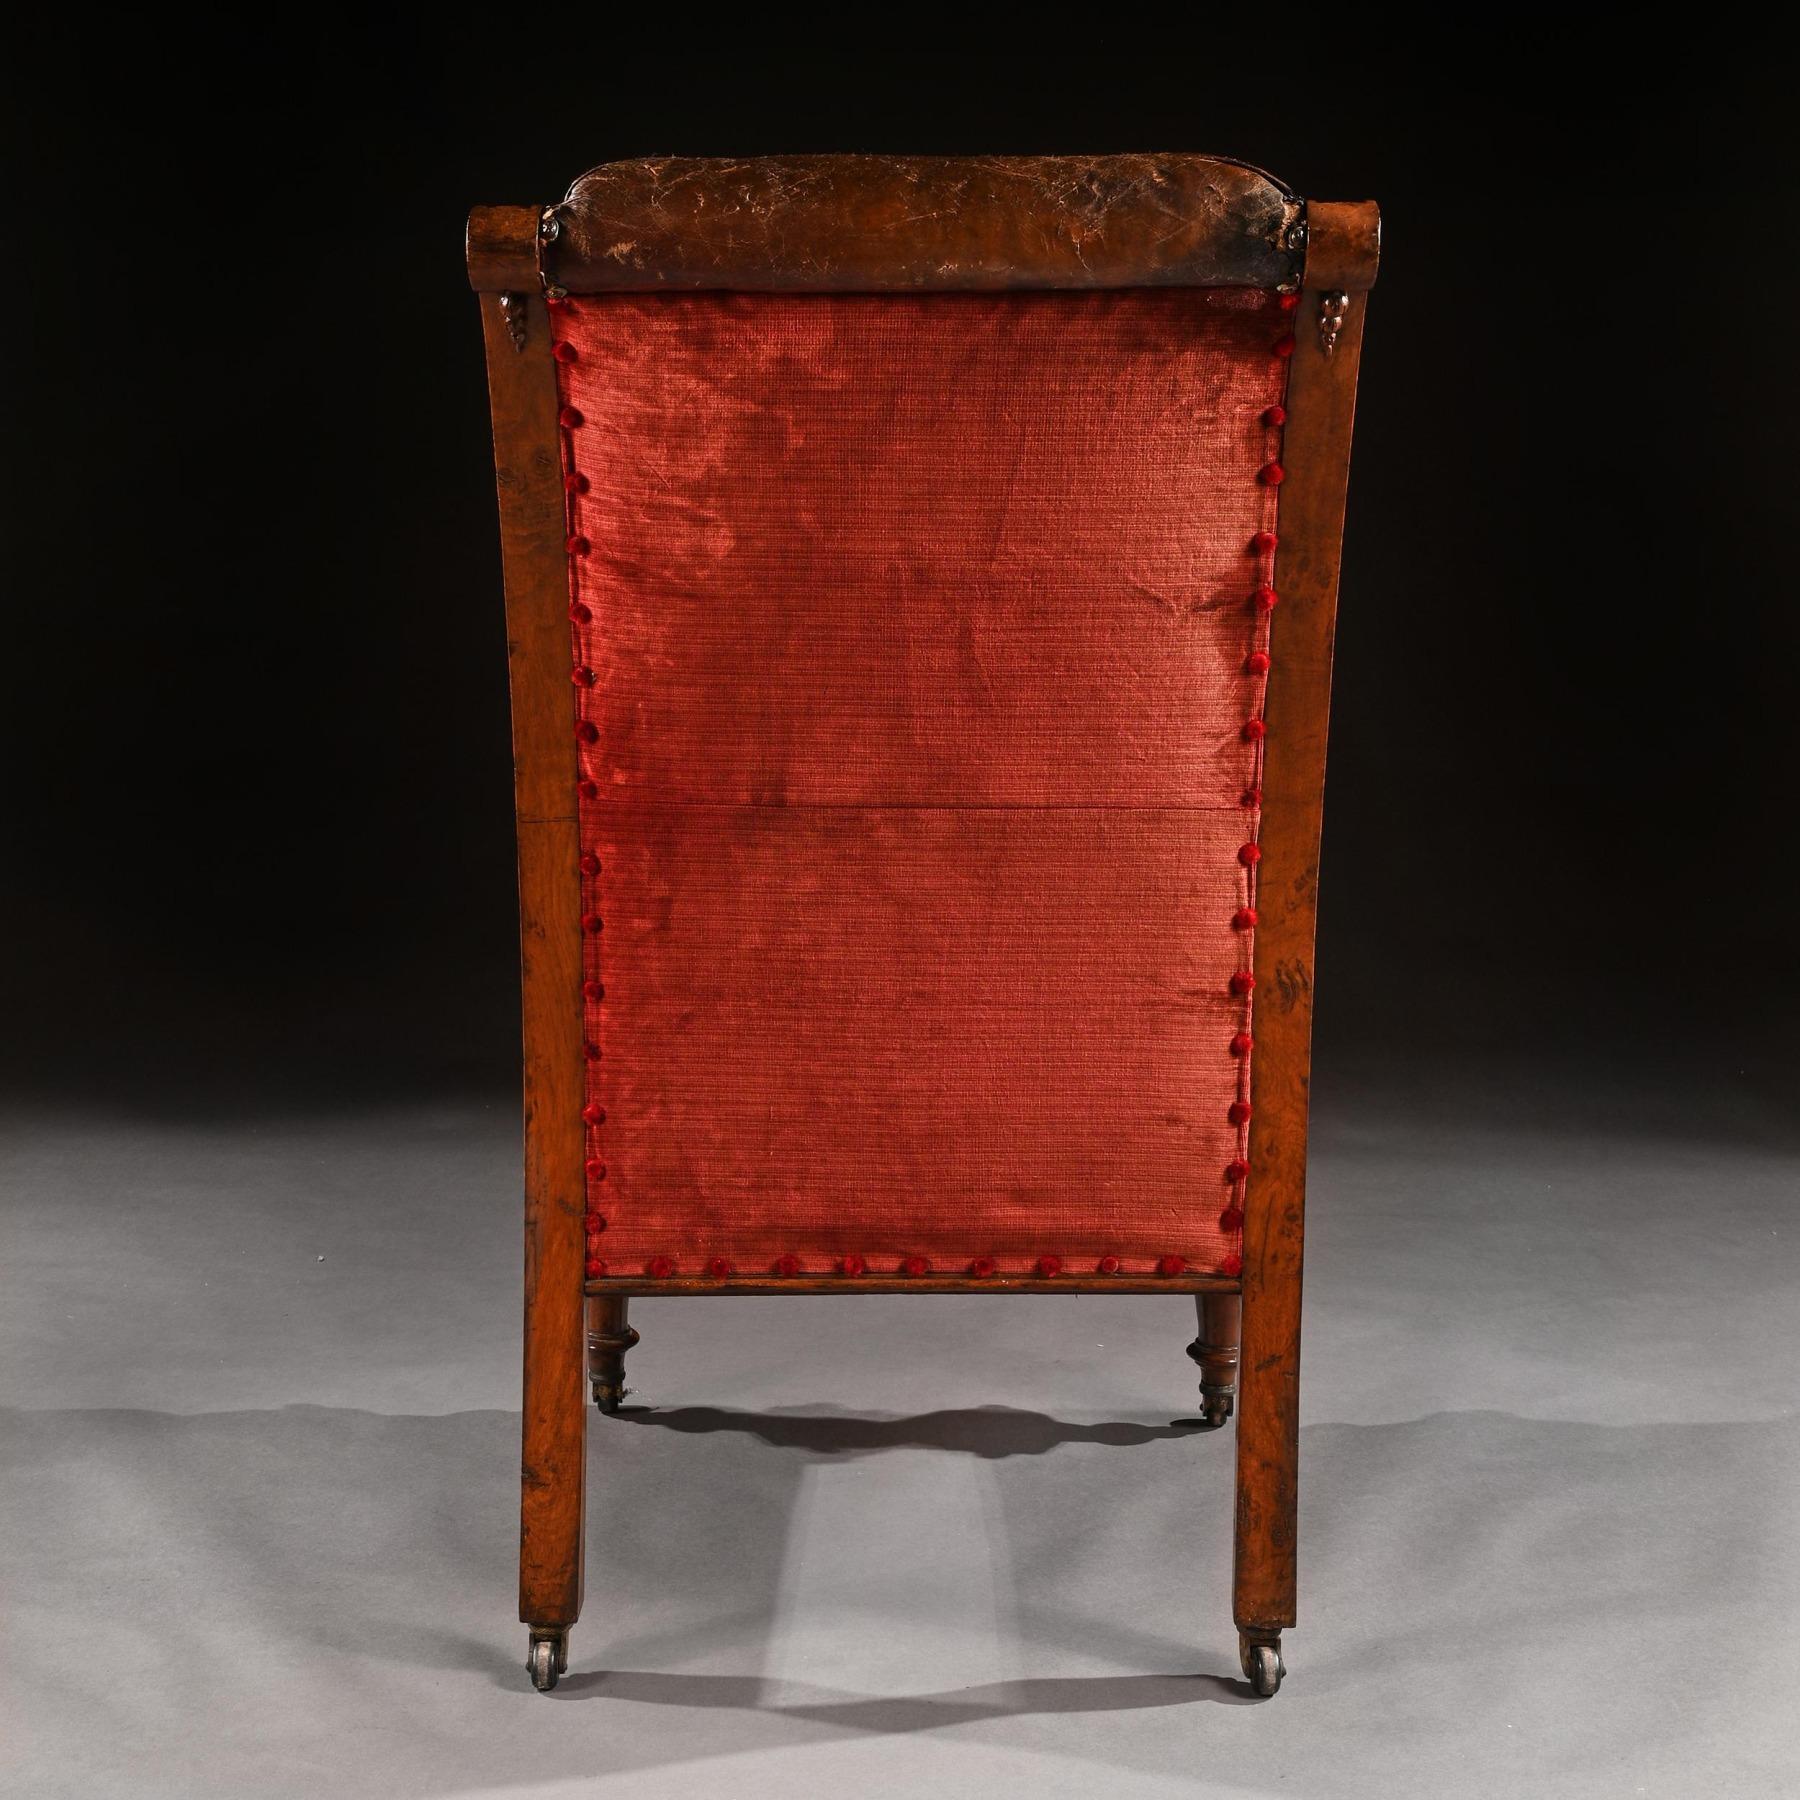 British Substantial 19th Century Oak and Moroccan Leather Armchair